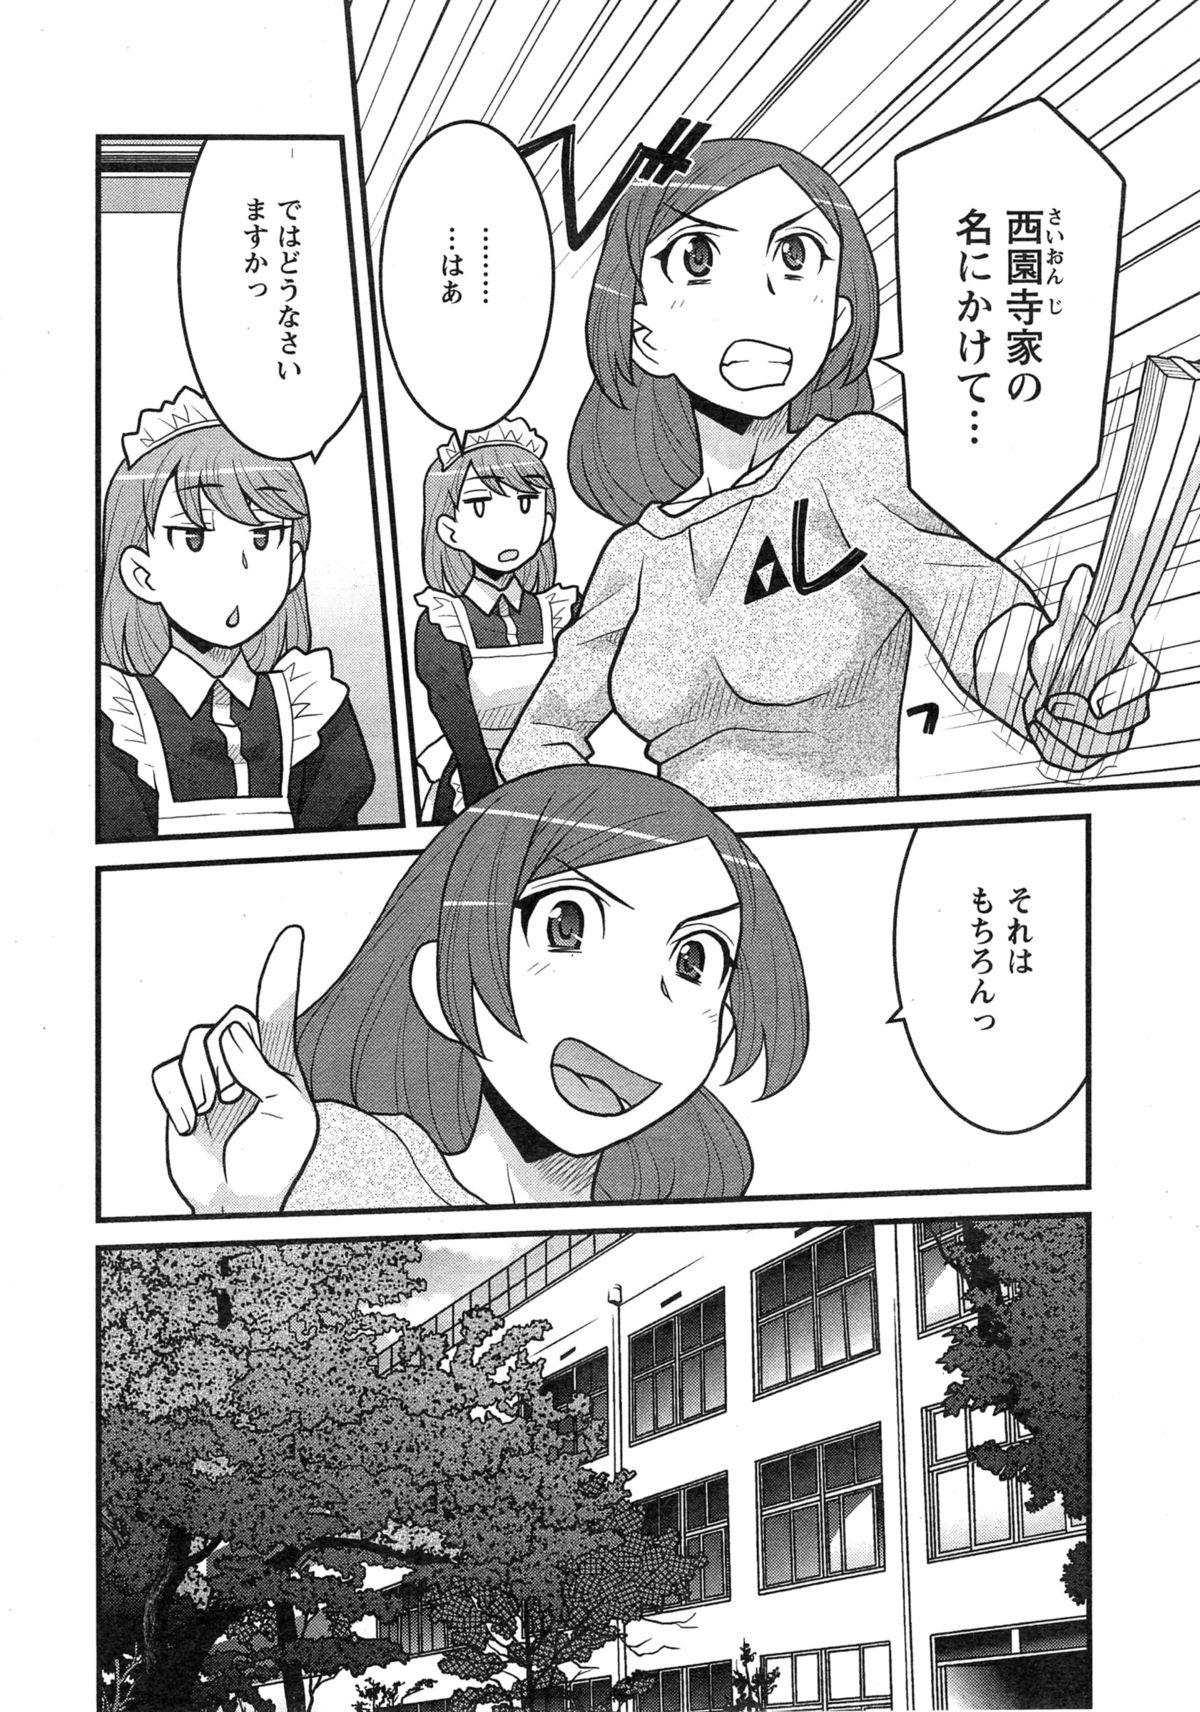 Action Pizazz DX 2015-03 page 10 full